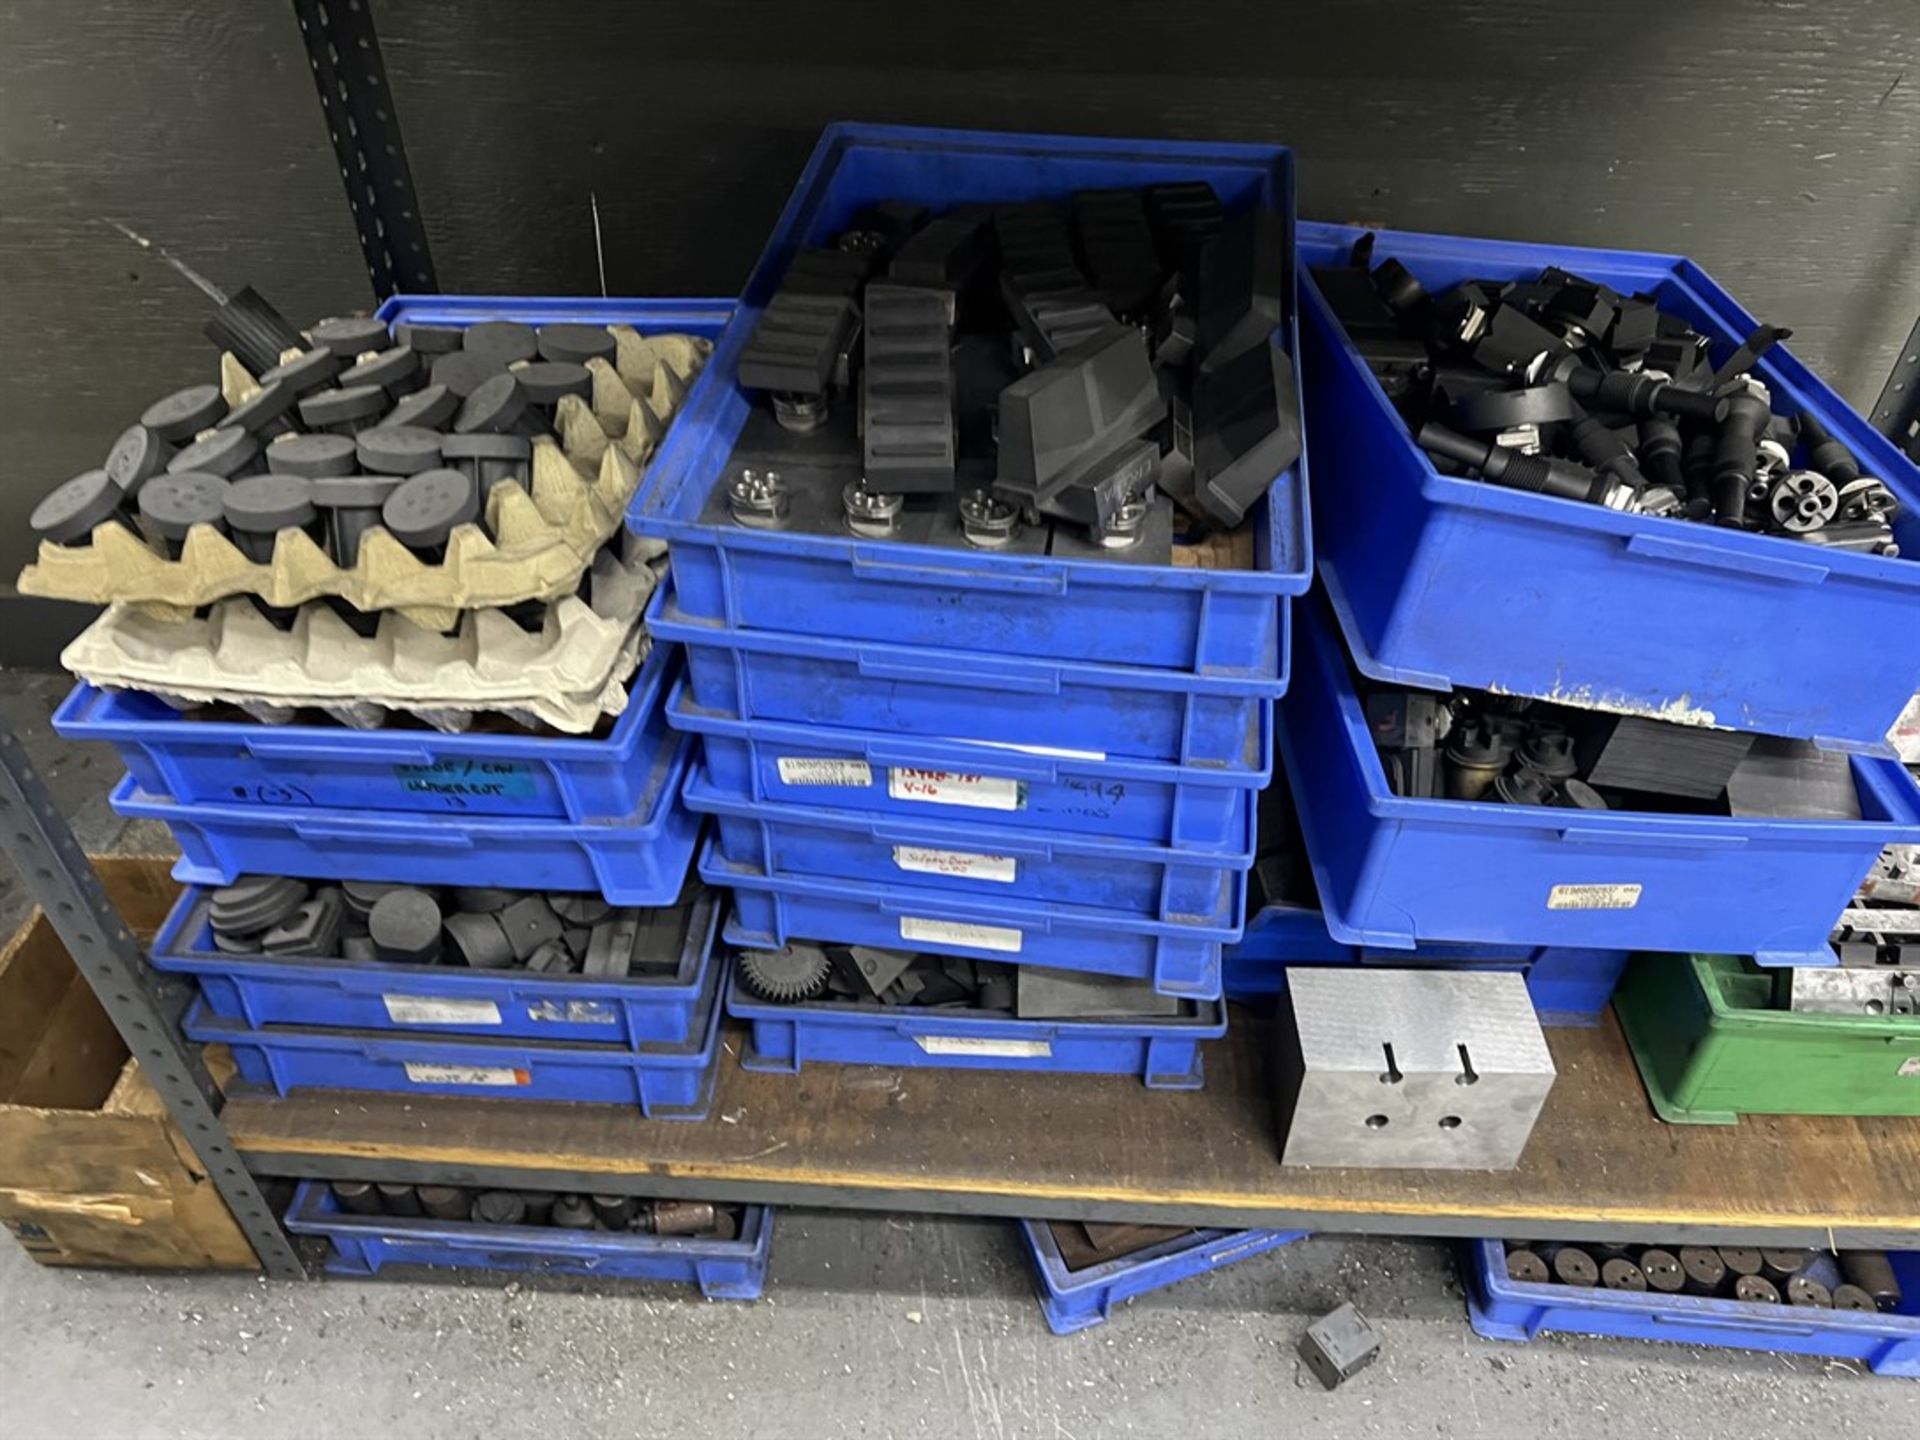 Rack of Assorted EROWA EDM Tooling, Fixtures, and Electrodes - Image 3 of 5